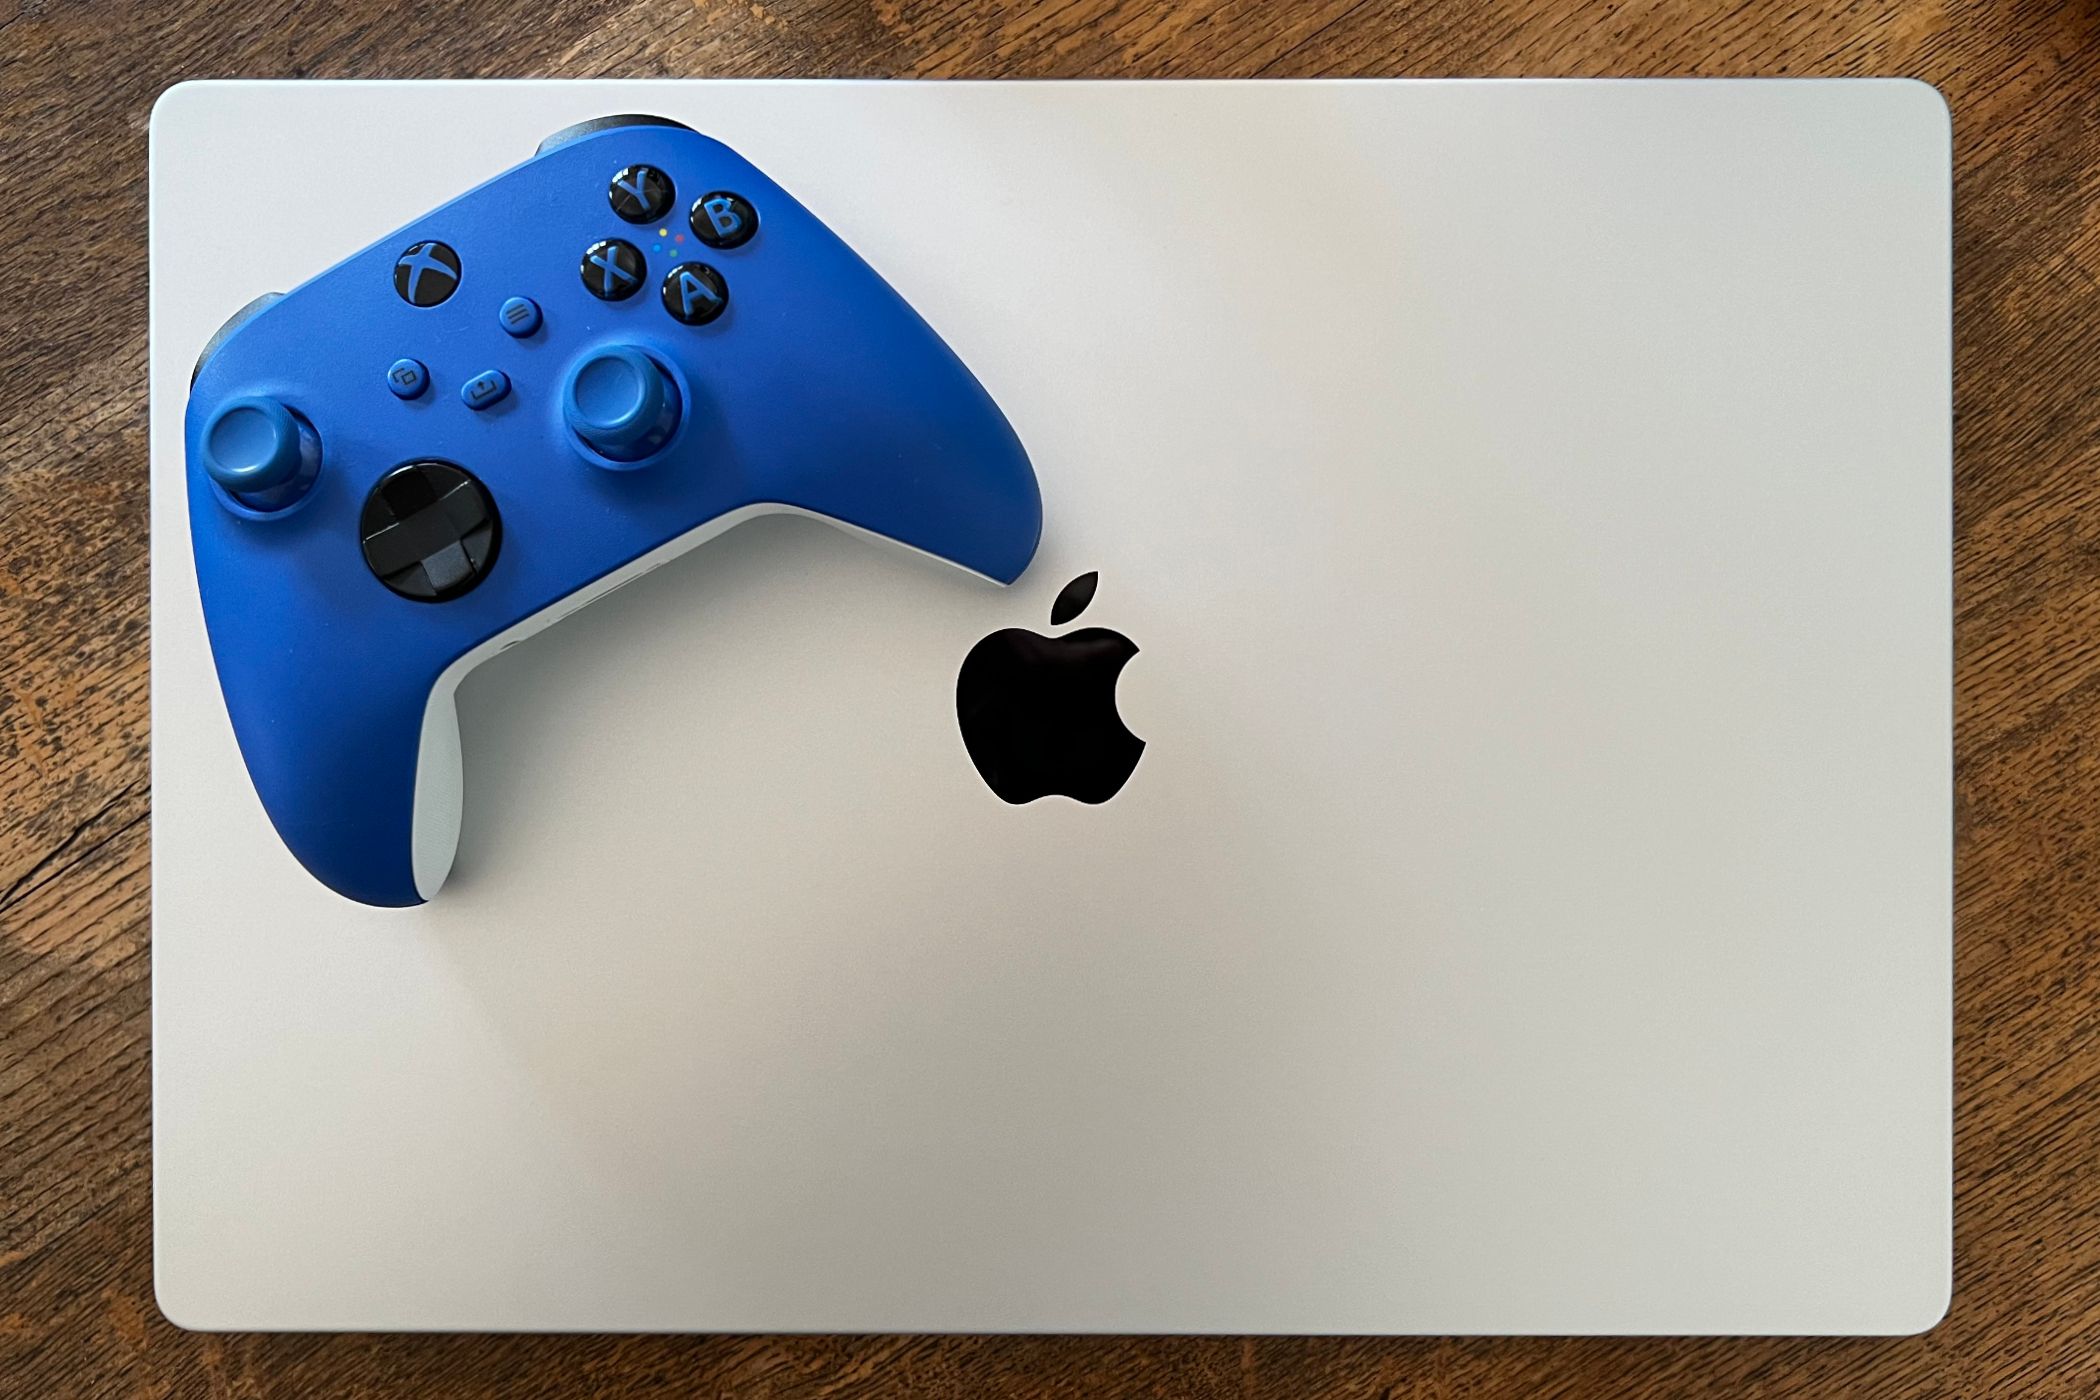 MacBook Pro with Xbox Series X (Core) controller